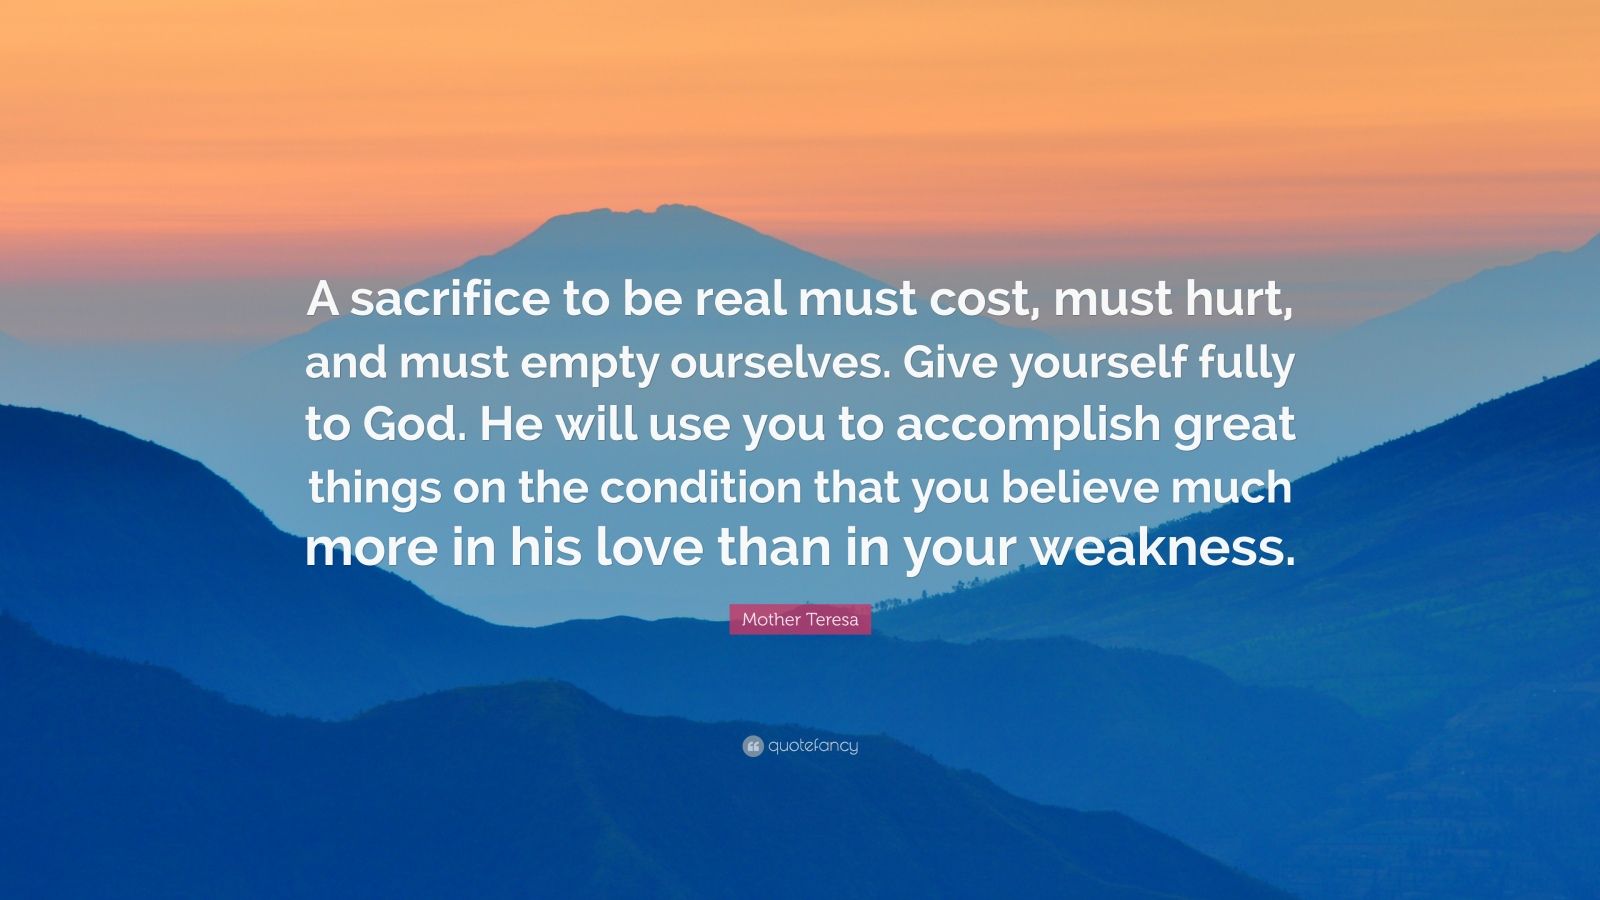 Mother Teresa Quote “A sacrifice to be real must cost must hurt